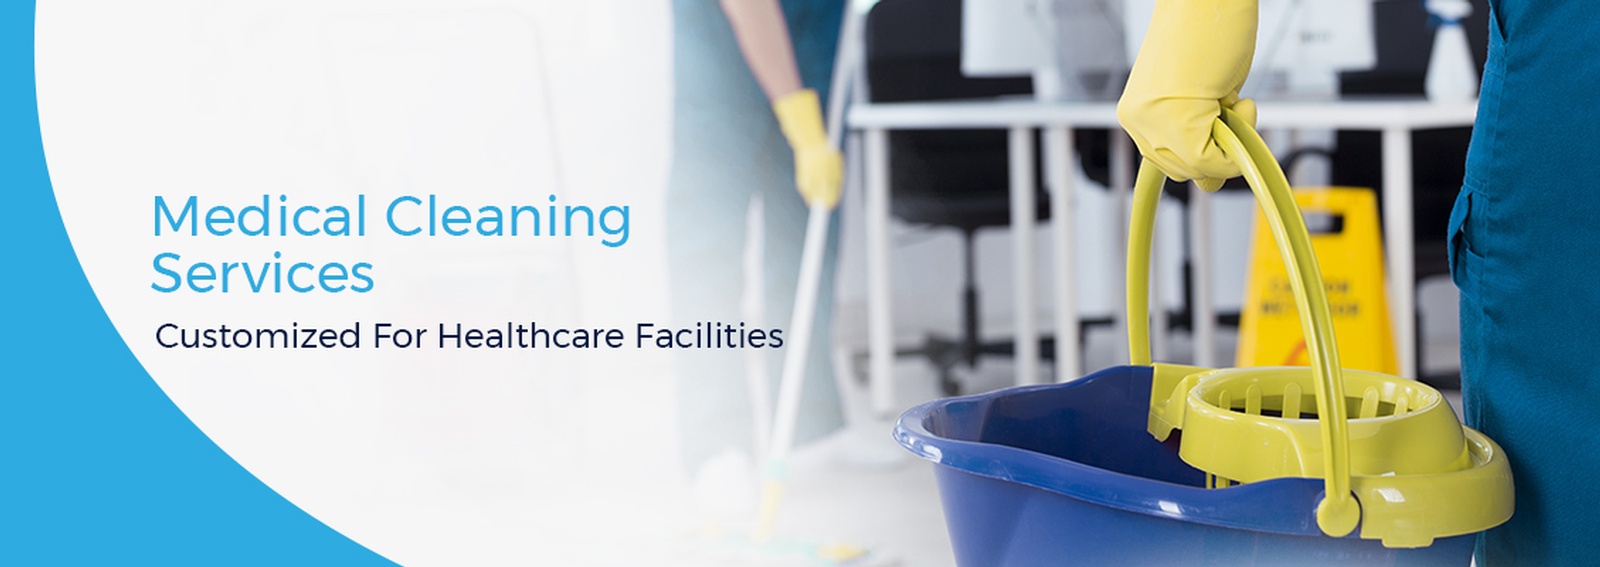 Medical/ Healthcare Facility Cleaning Services in Hamilton, Ontario